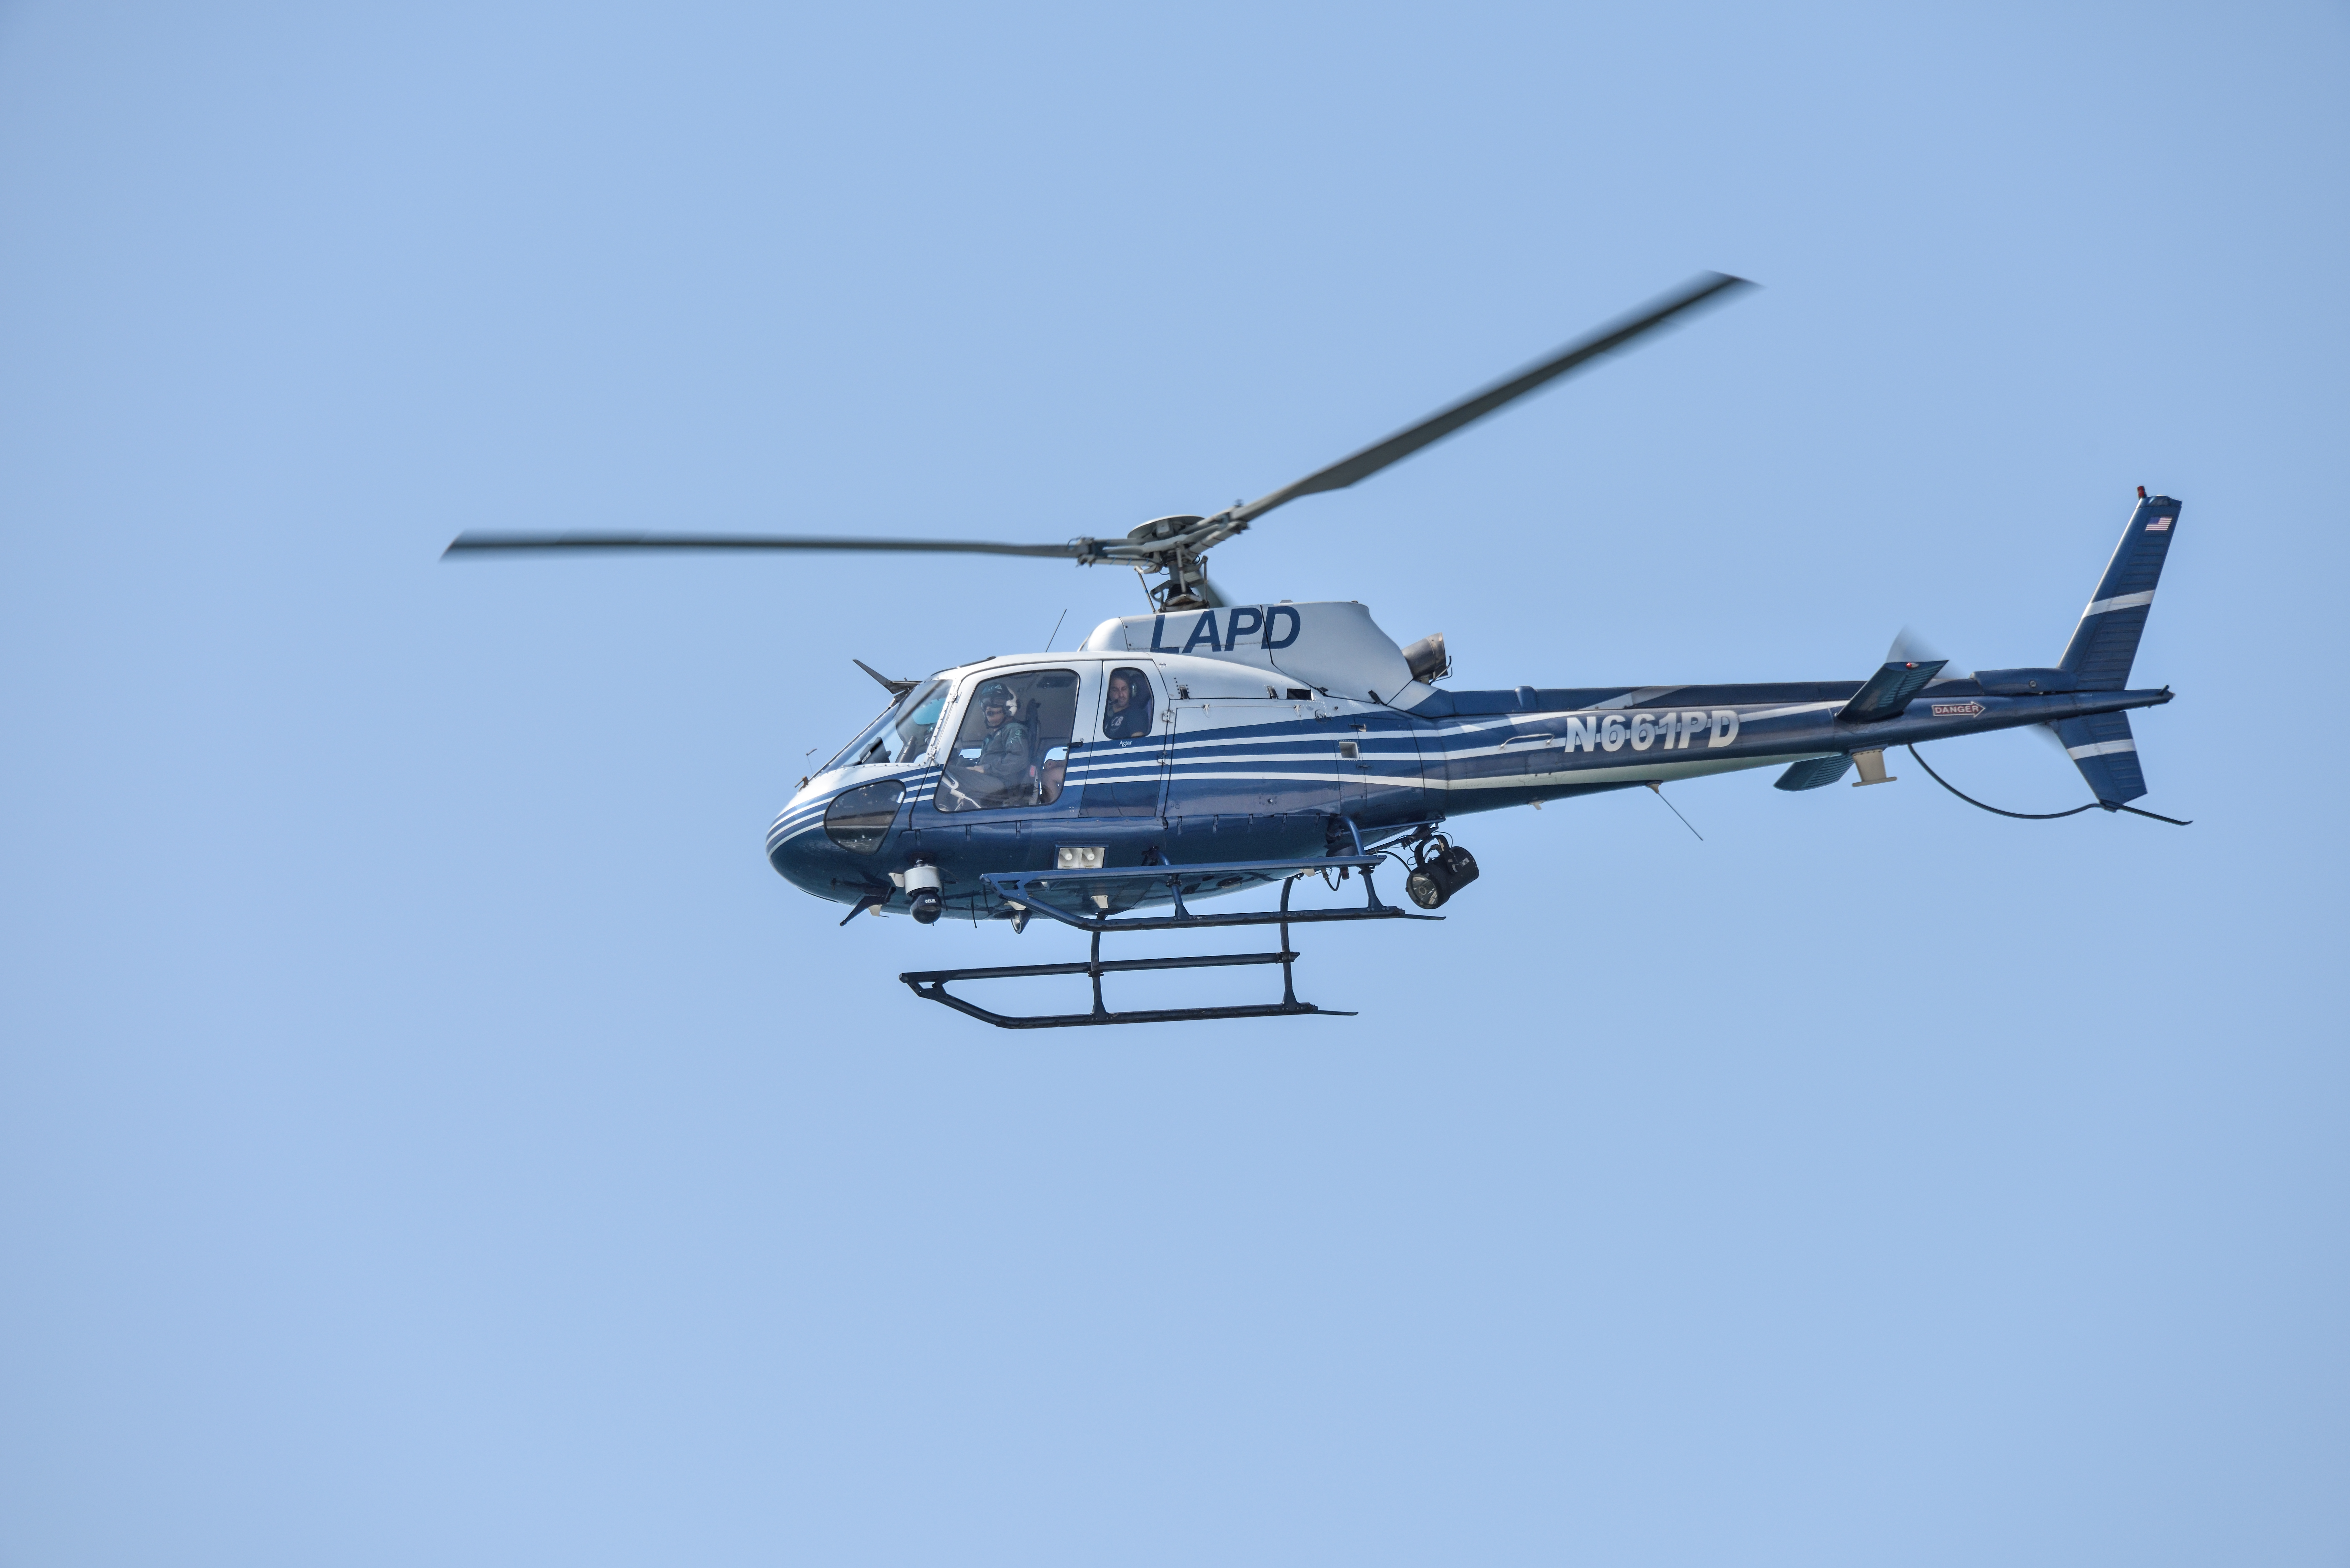 File:Los Angeles Police Department Helicopter.jpg - Wikimedia Commons